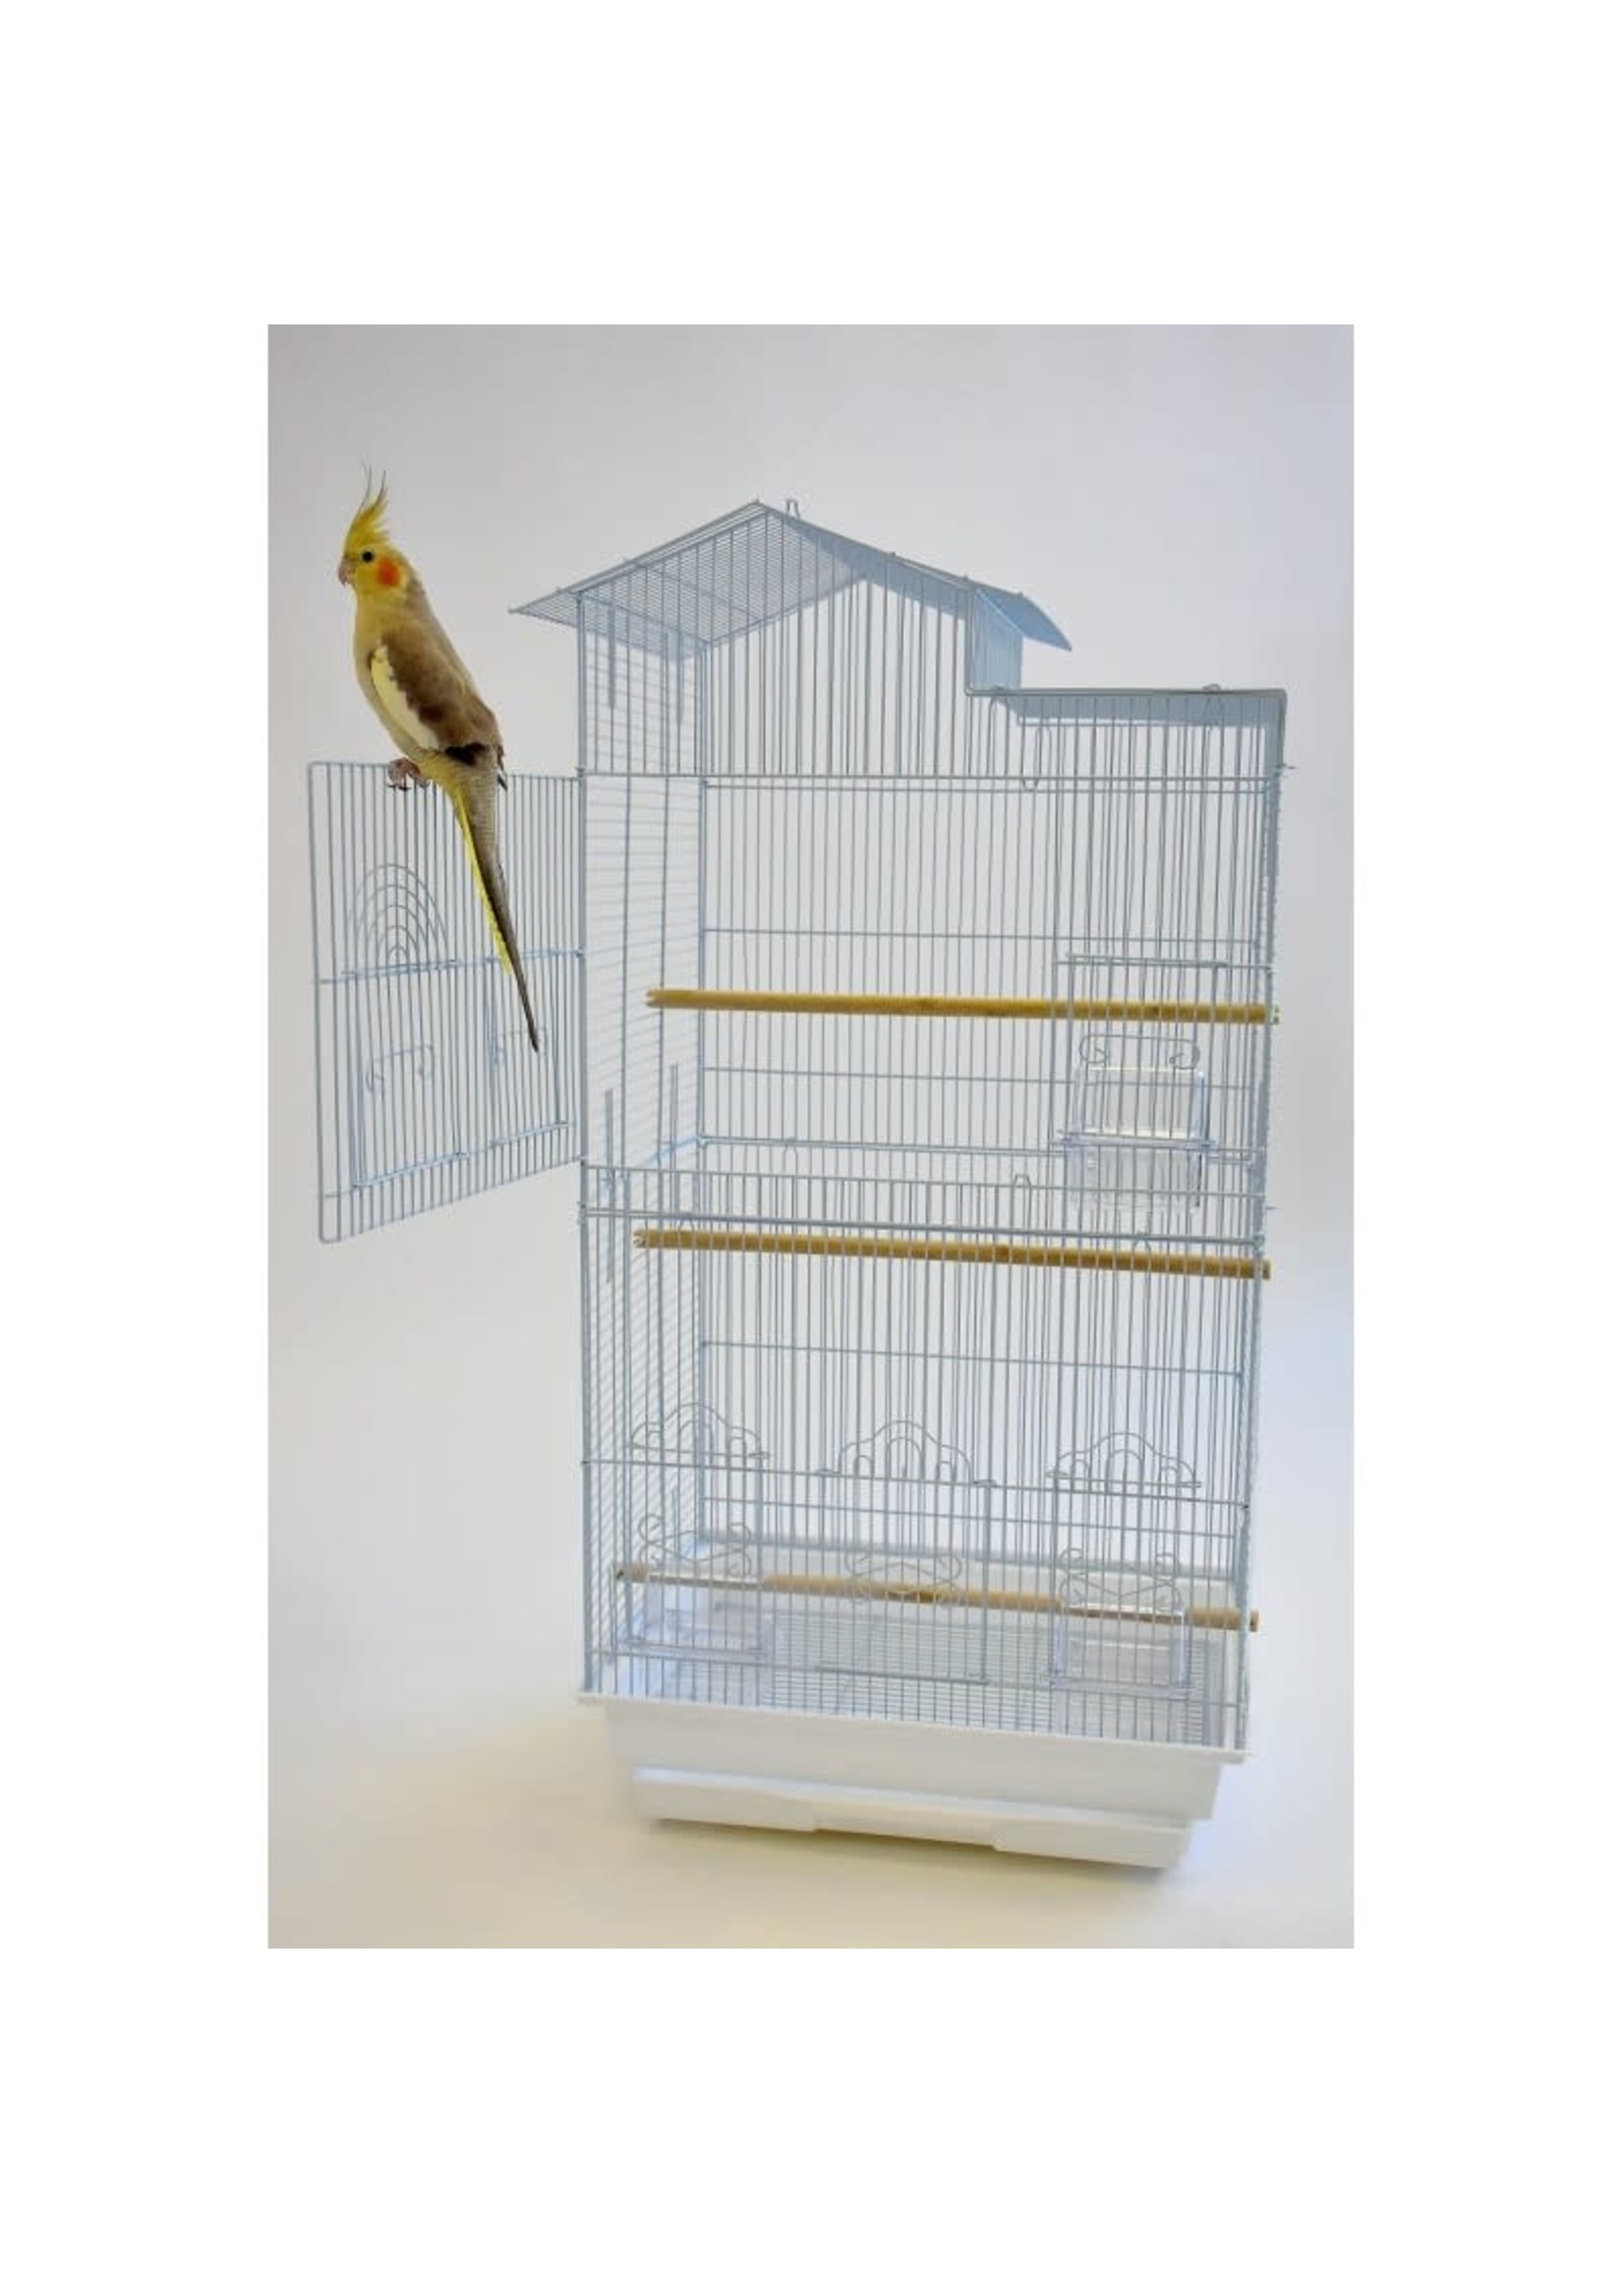 Glitter Pets GP (BS05) HOUSE STYLE SMALL BIRD CAGE 18x14x35